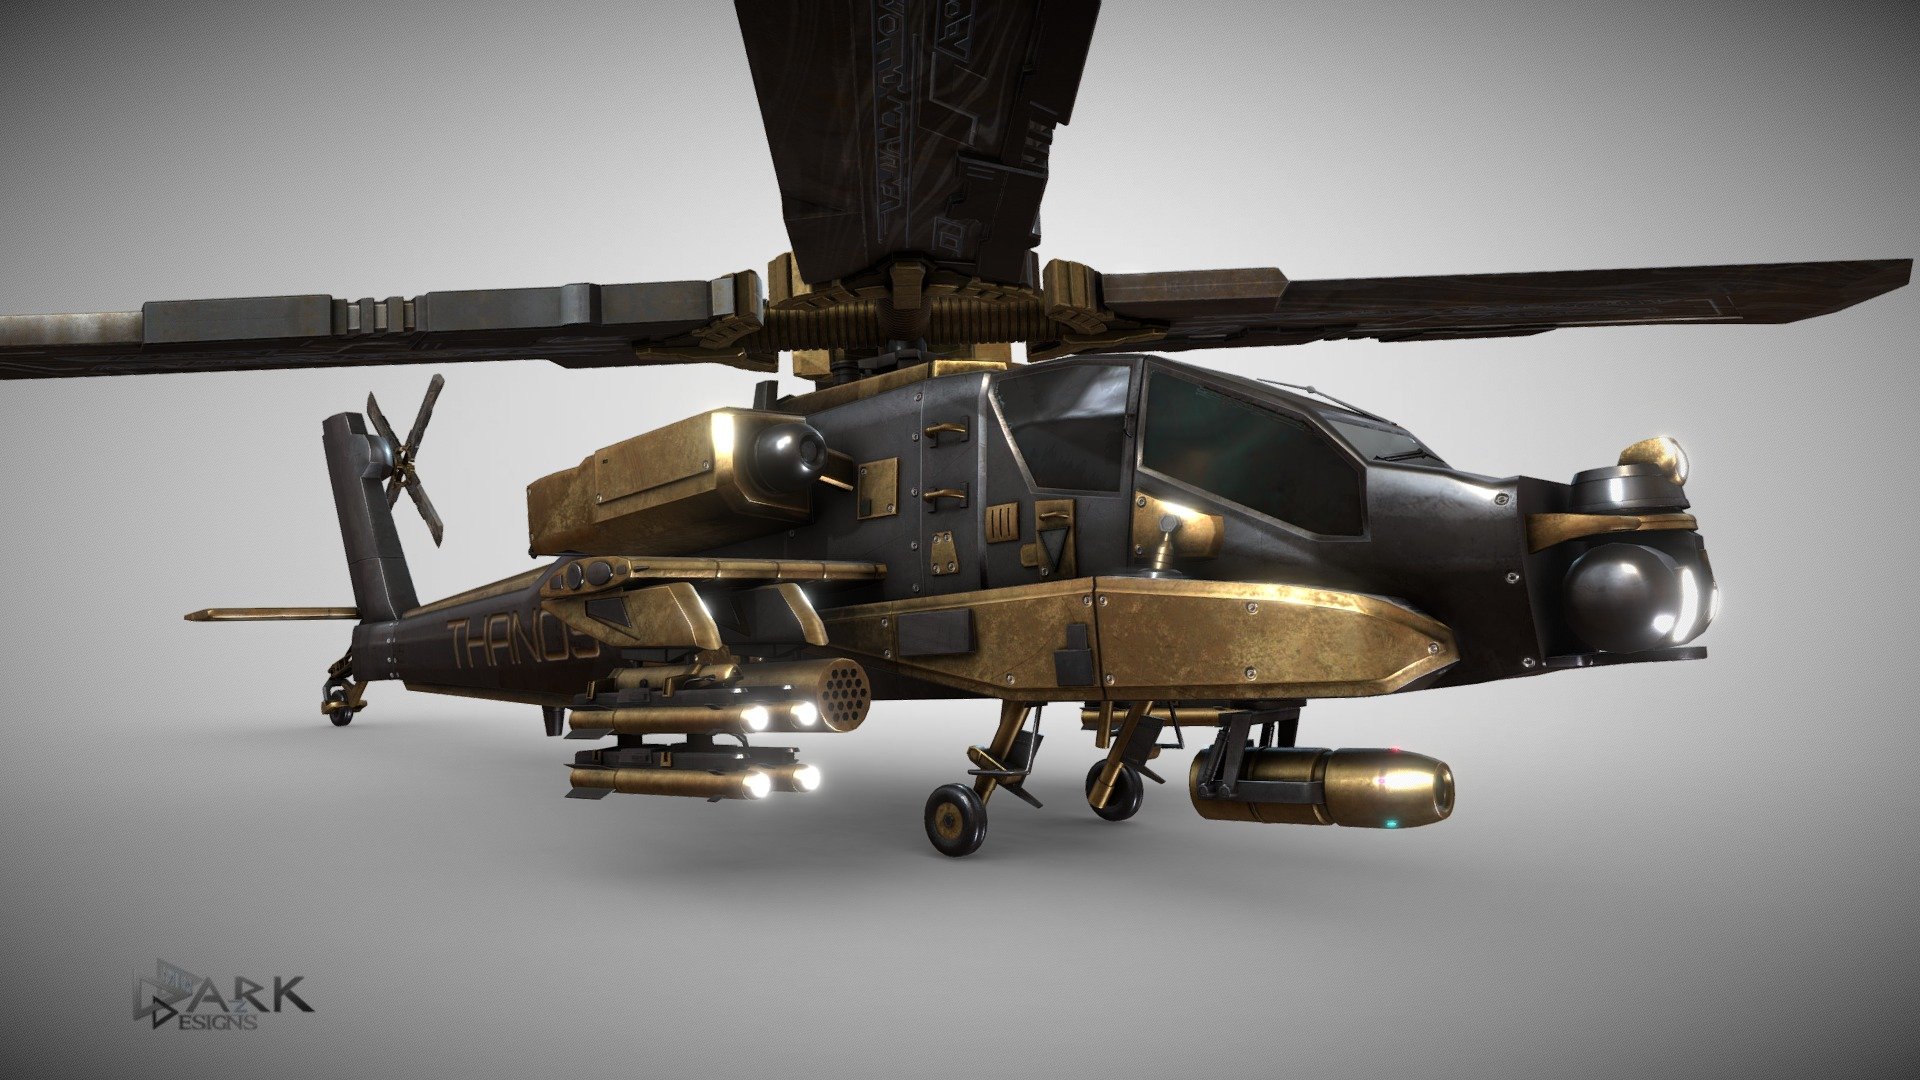 Thanos, the mightest of heroes needed a chopper in the Comic books, so i decided to give it a bit of a newer look by infusing it with the base of the Apache AH-64, adding his signature swords from Avengers: Endgame and a little infinity canon (with only 5 gems, can't have him win by default) - Thanos Chopper - 3D model by dark-minaz 3d model